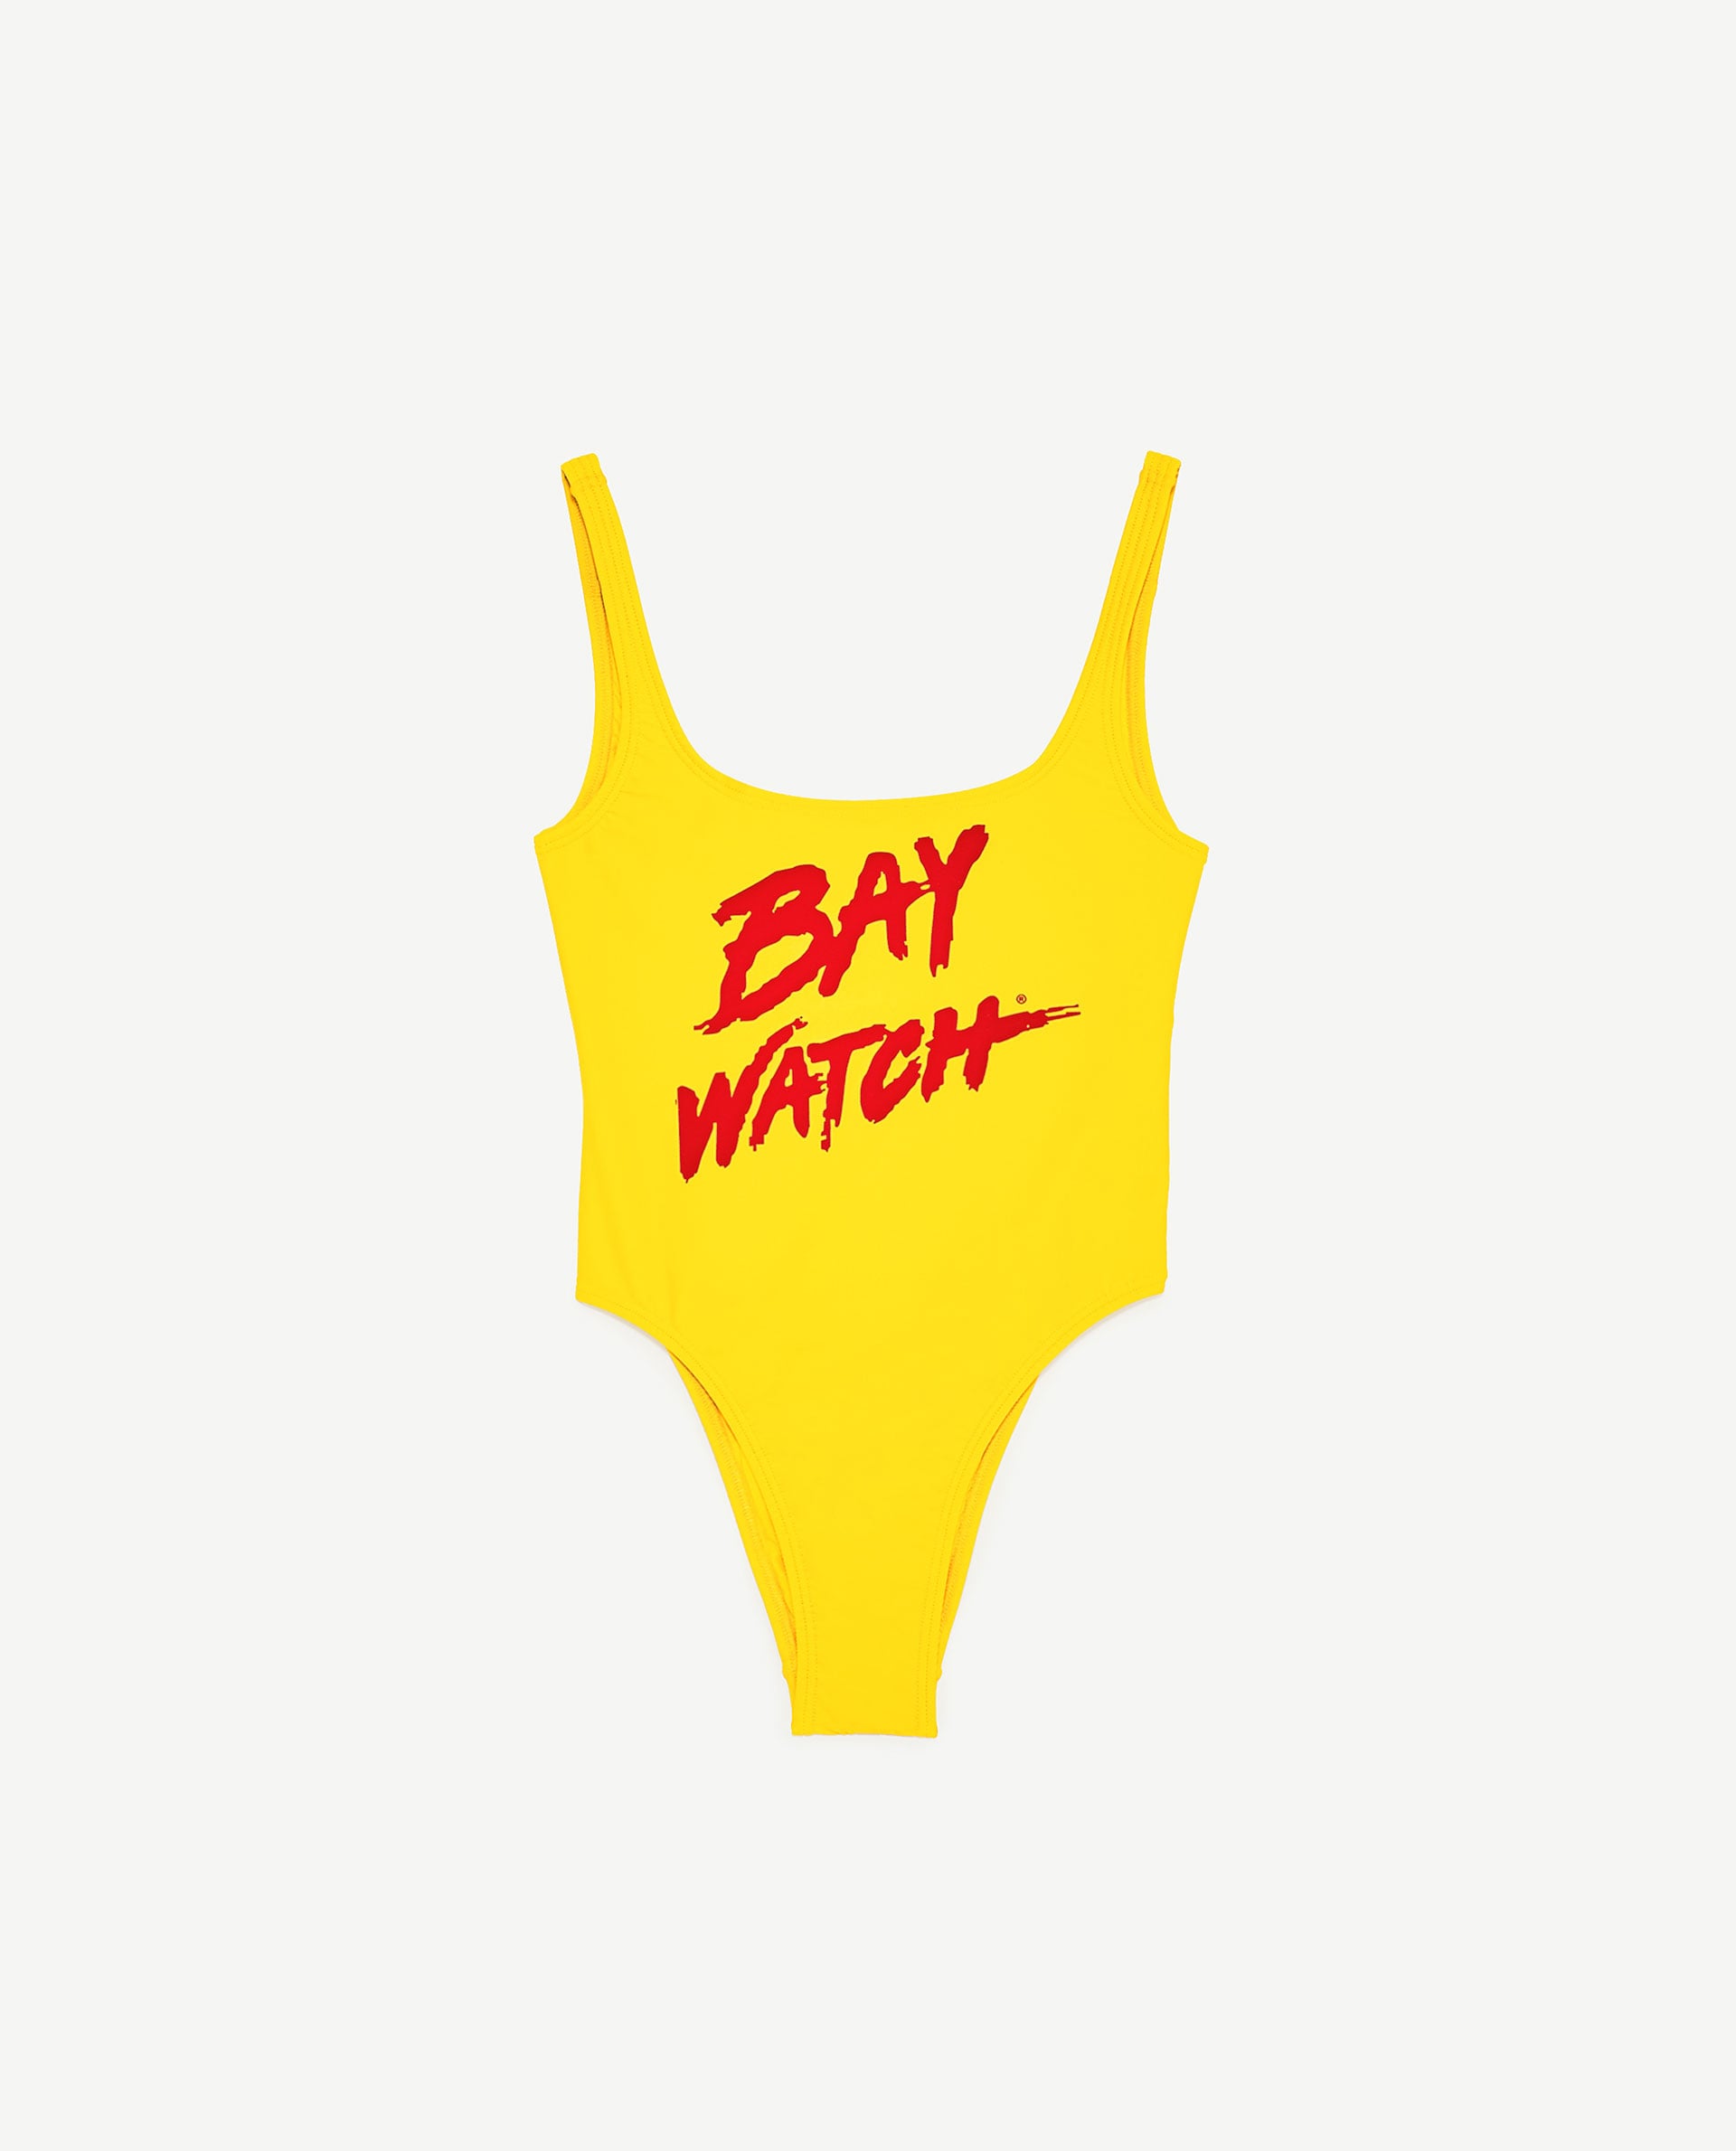 Baywatch Swimsuit | Save Time! Here Are 